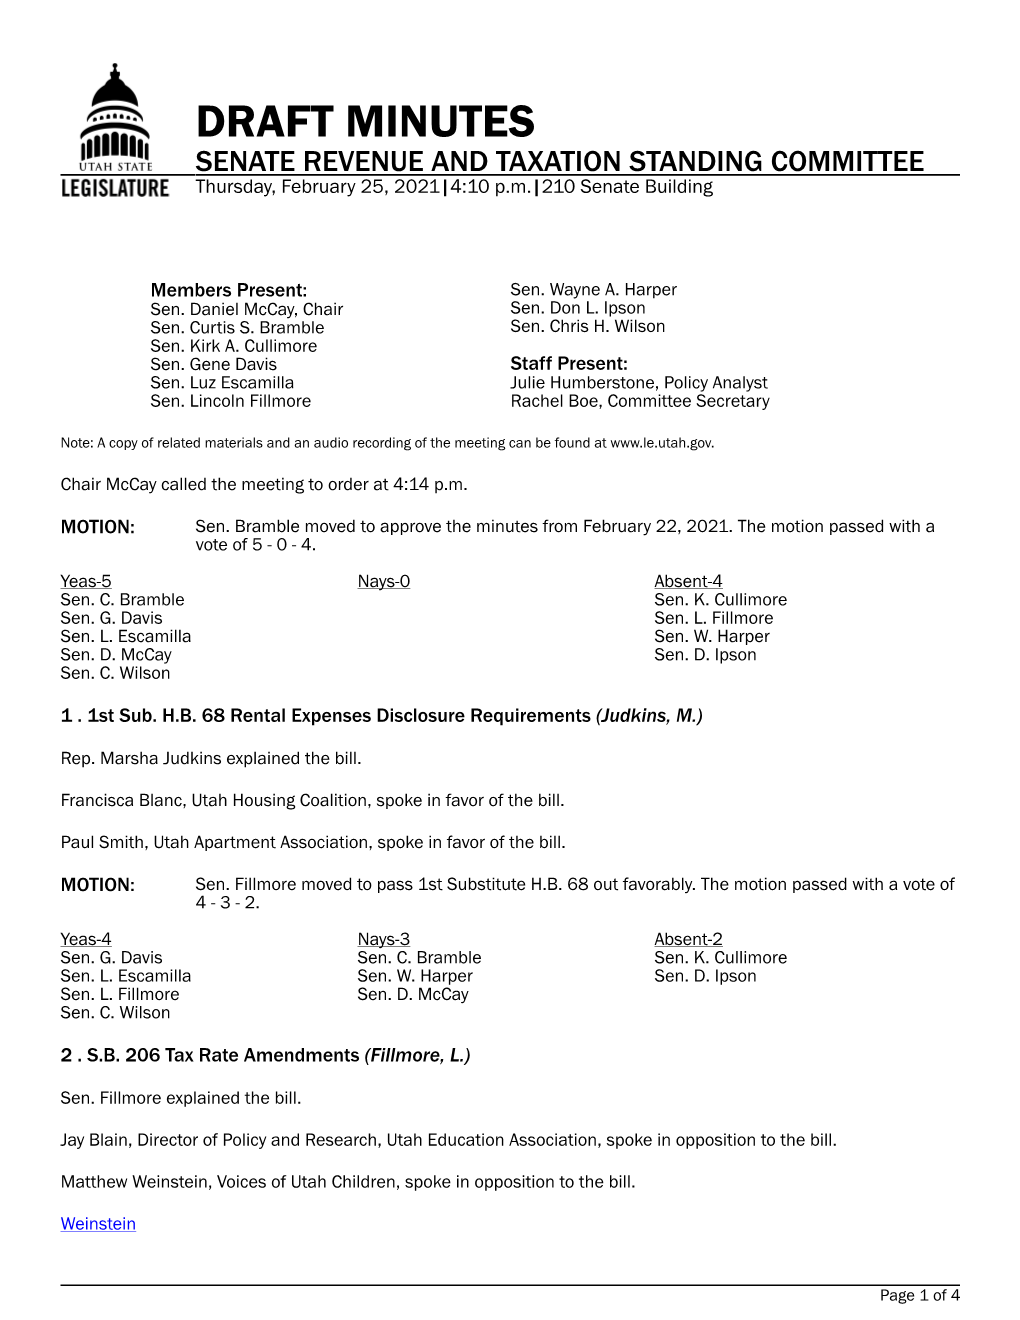 DRAFT MINUTES SENATE REVENUE and TAXATION STANDING COMMITTEE Thursday, February 25, 2021|4:10 P.M.|210 Senate Building